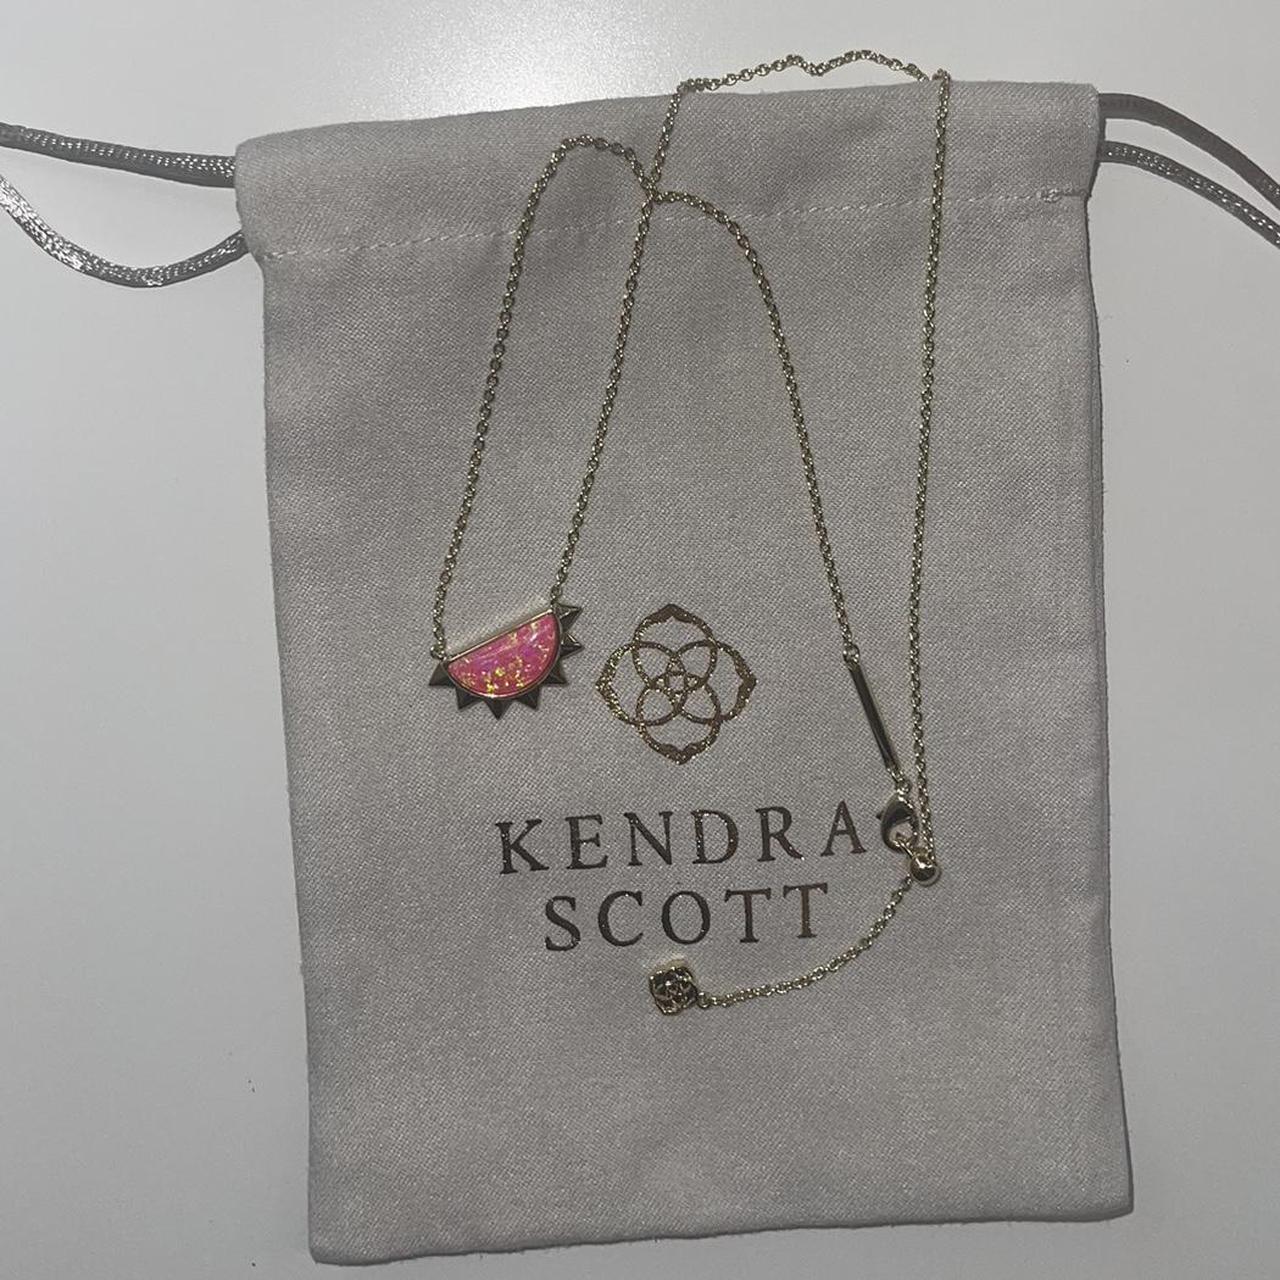 Can You Shower With a Kendra Scott Necklace On? – Fetchthelove Inc.